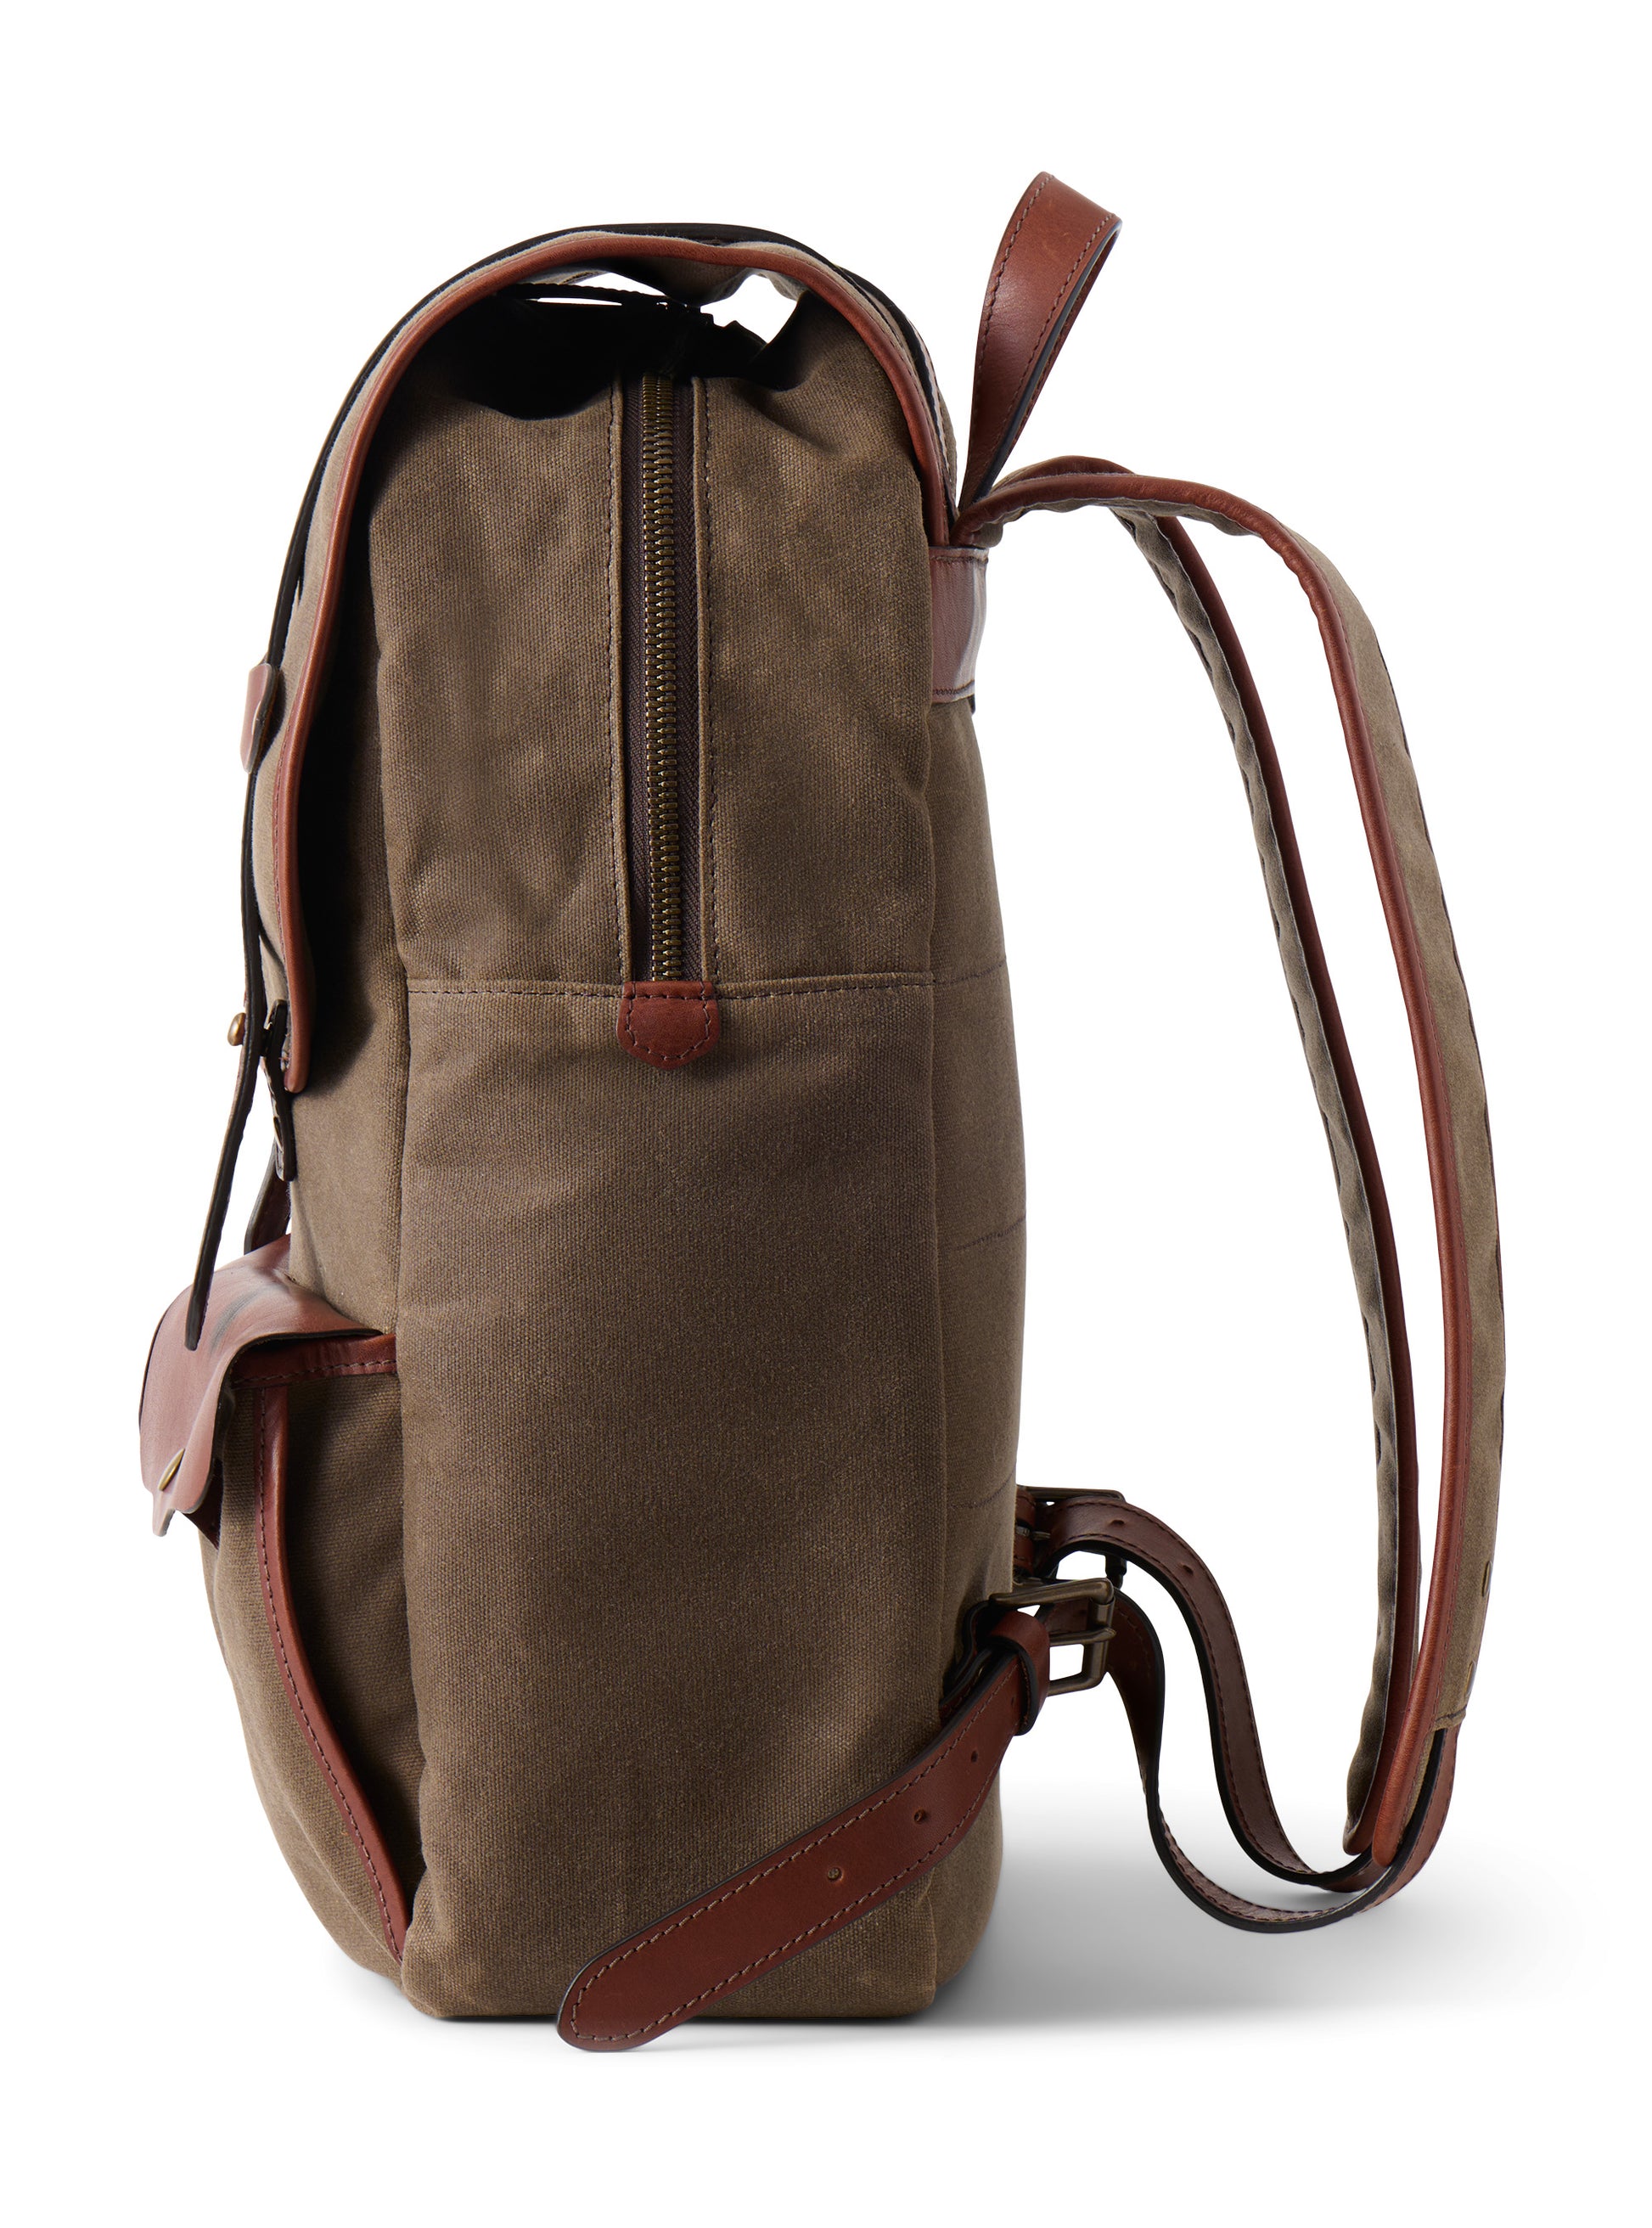 Founder's Backpack side view by Jackson Wayne